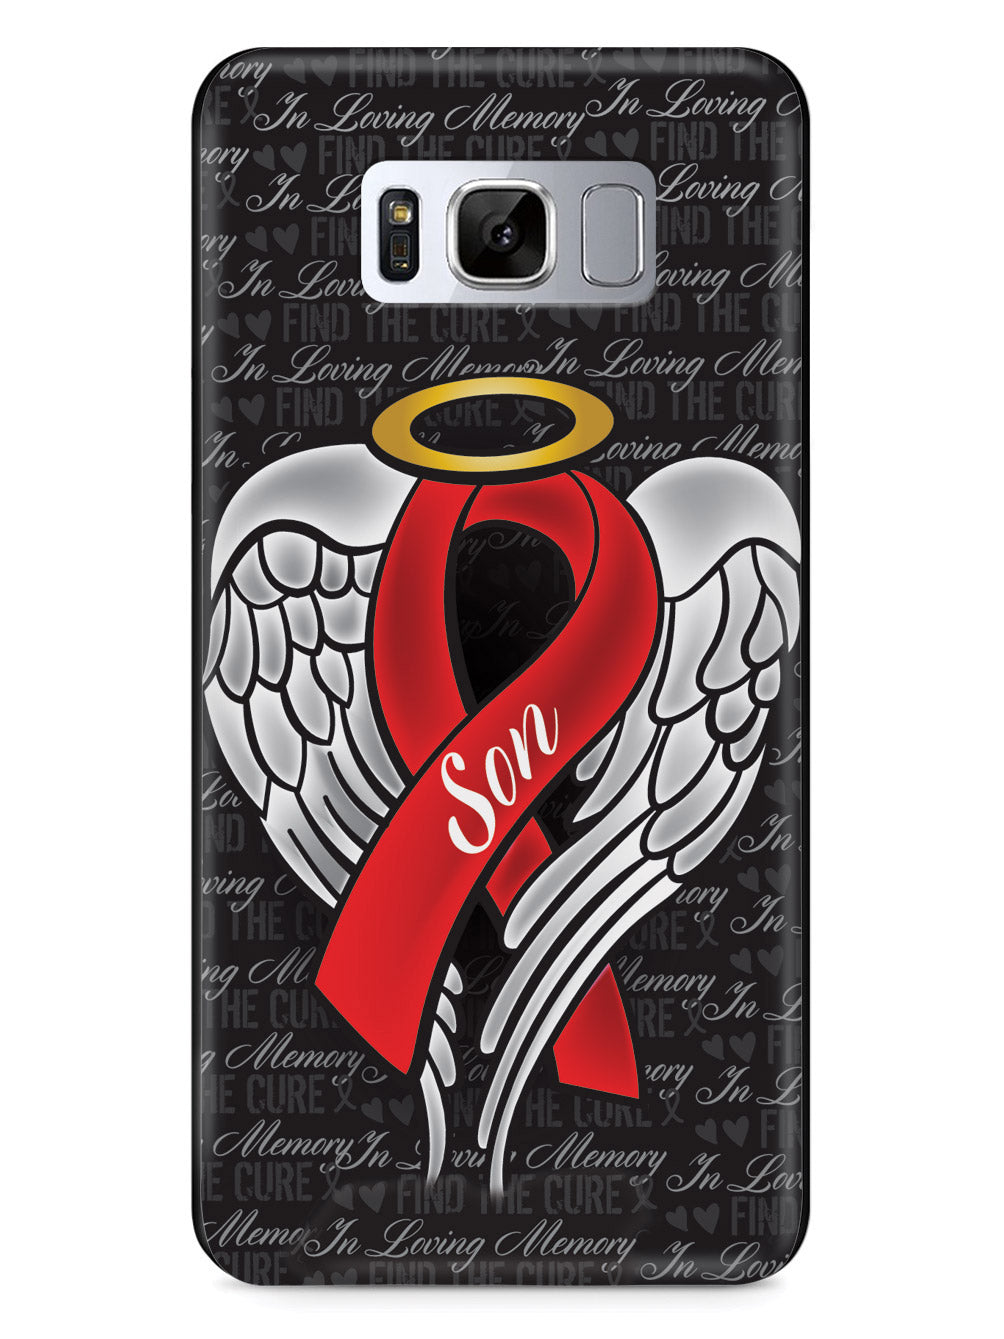 In Loving Memory of My Son - Red Ribbon Case